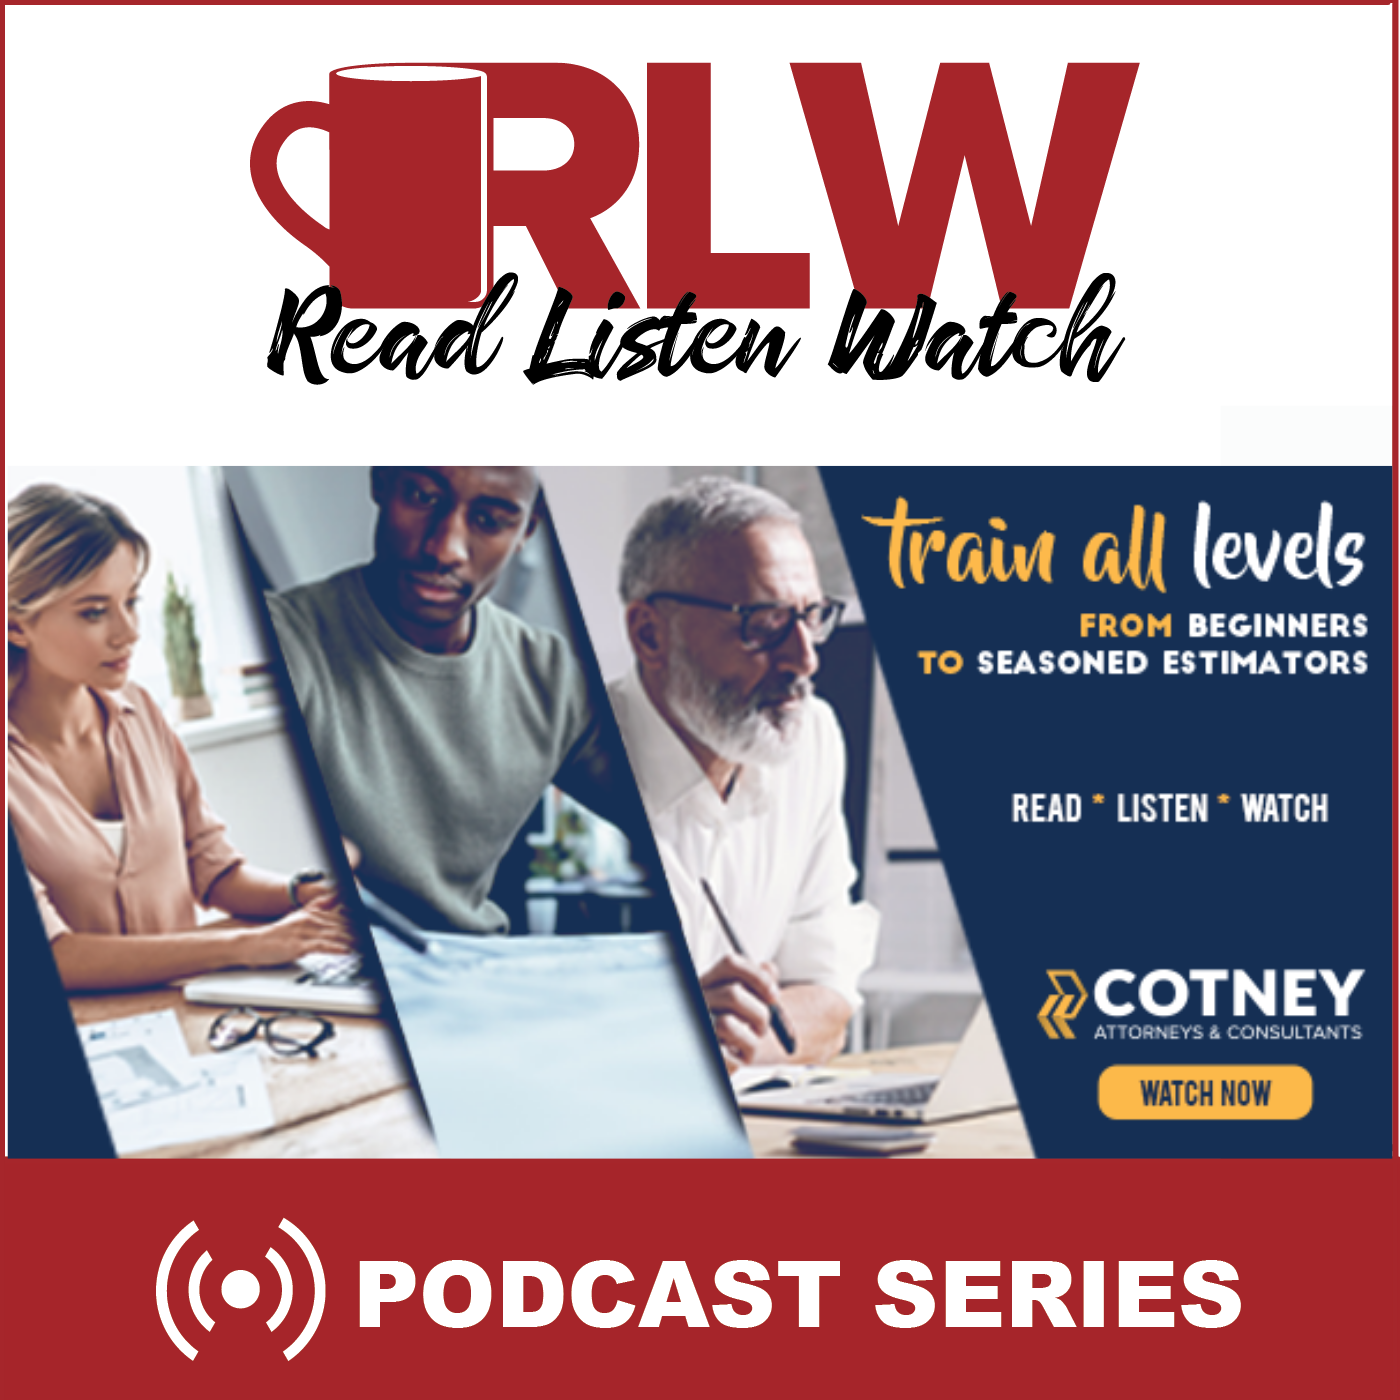 Cotney - RLW - How to Train and Certify your Estimators! - Watch - Pod